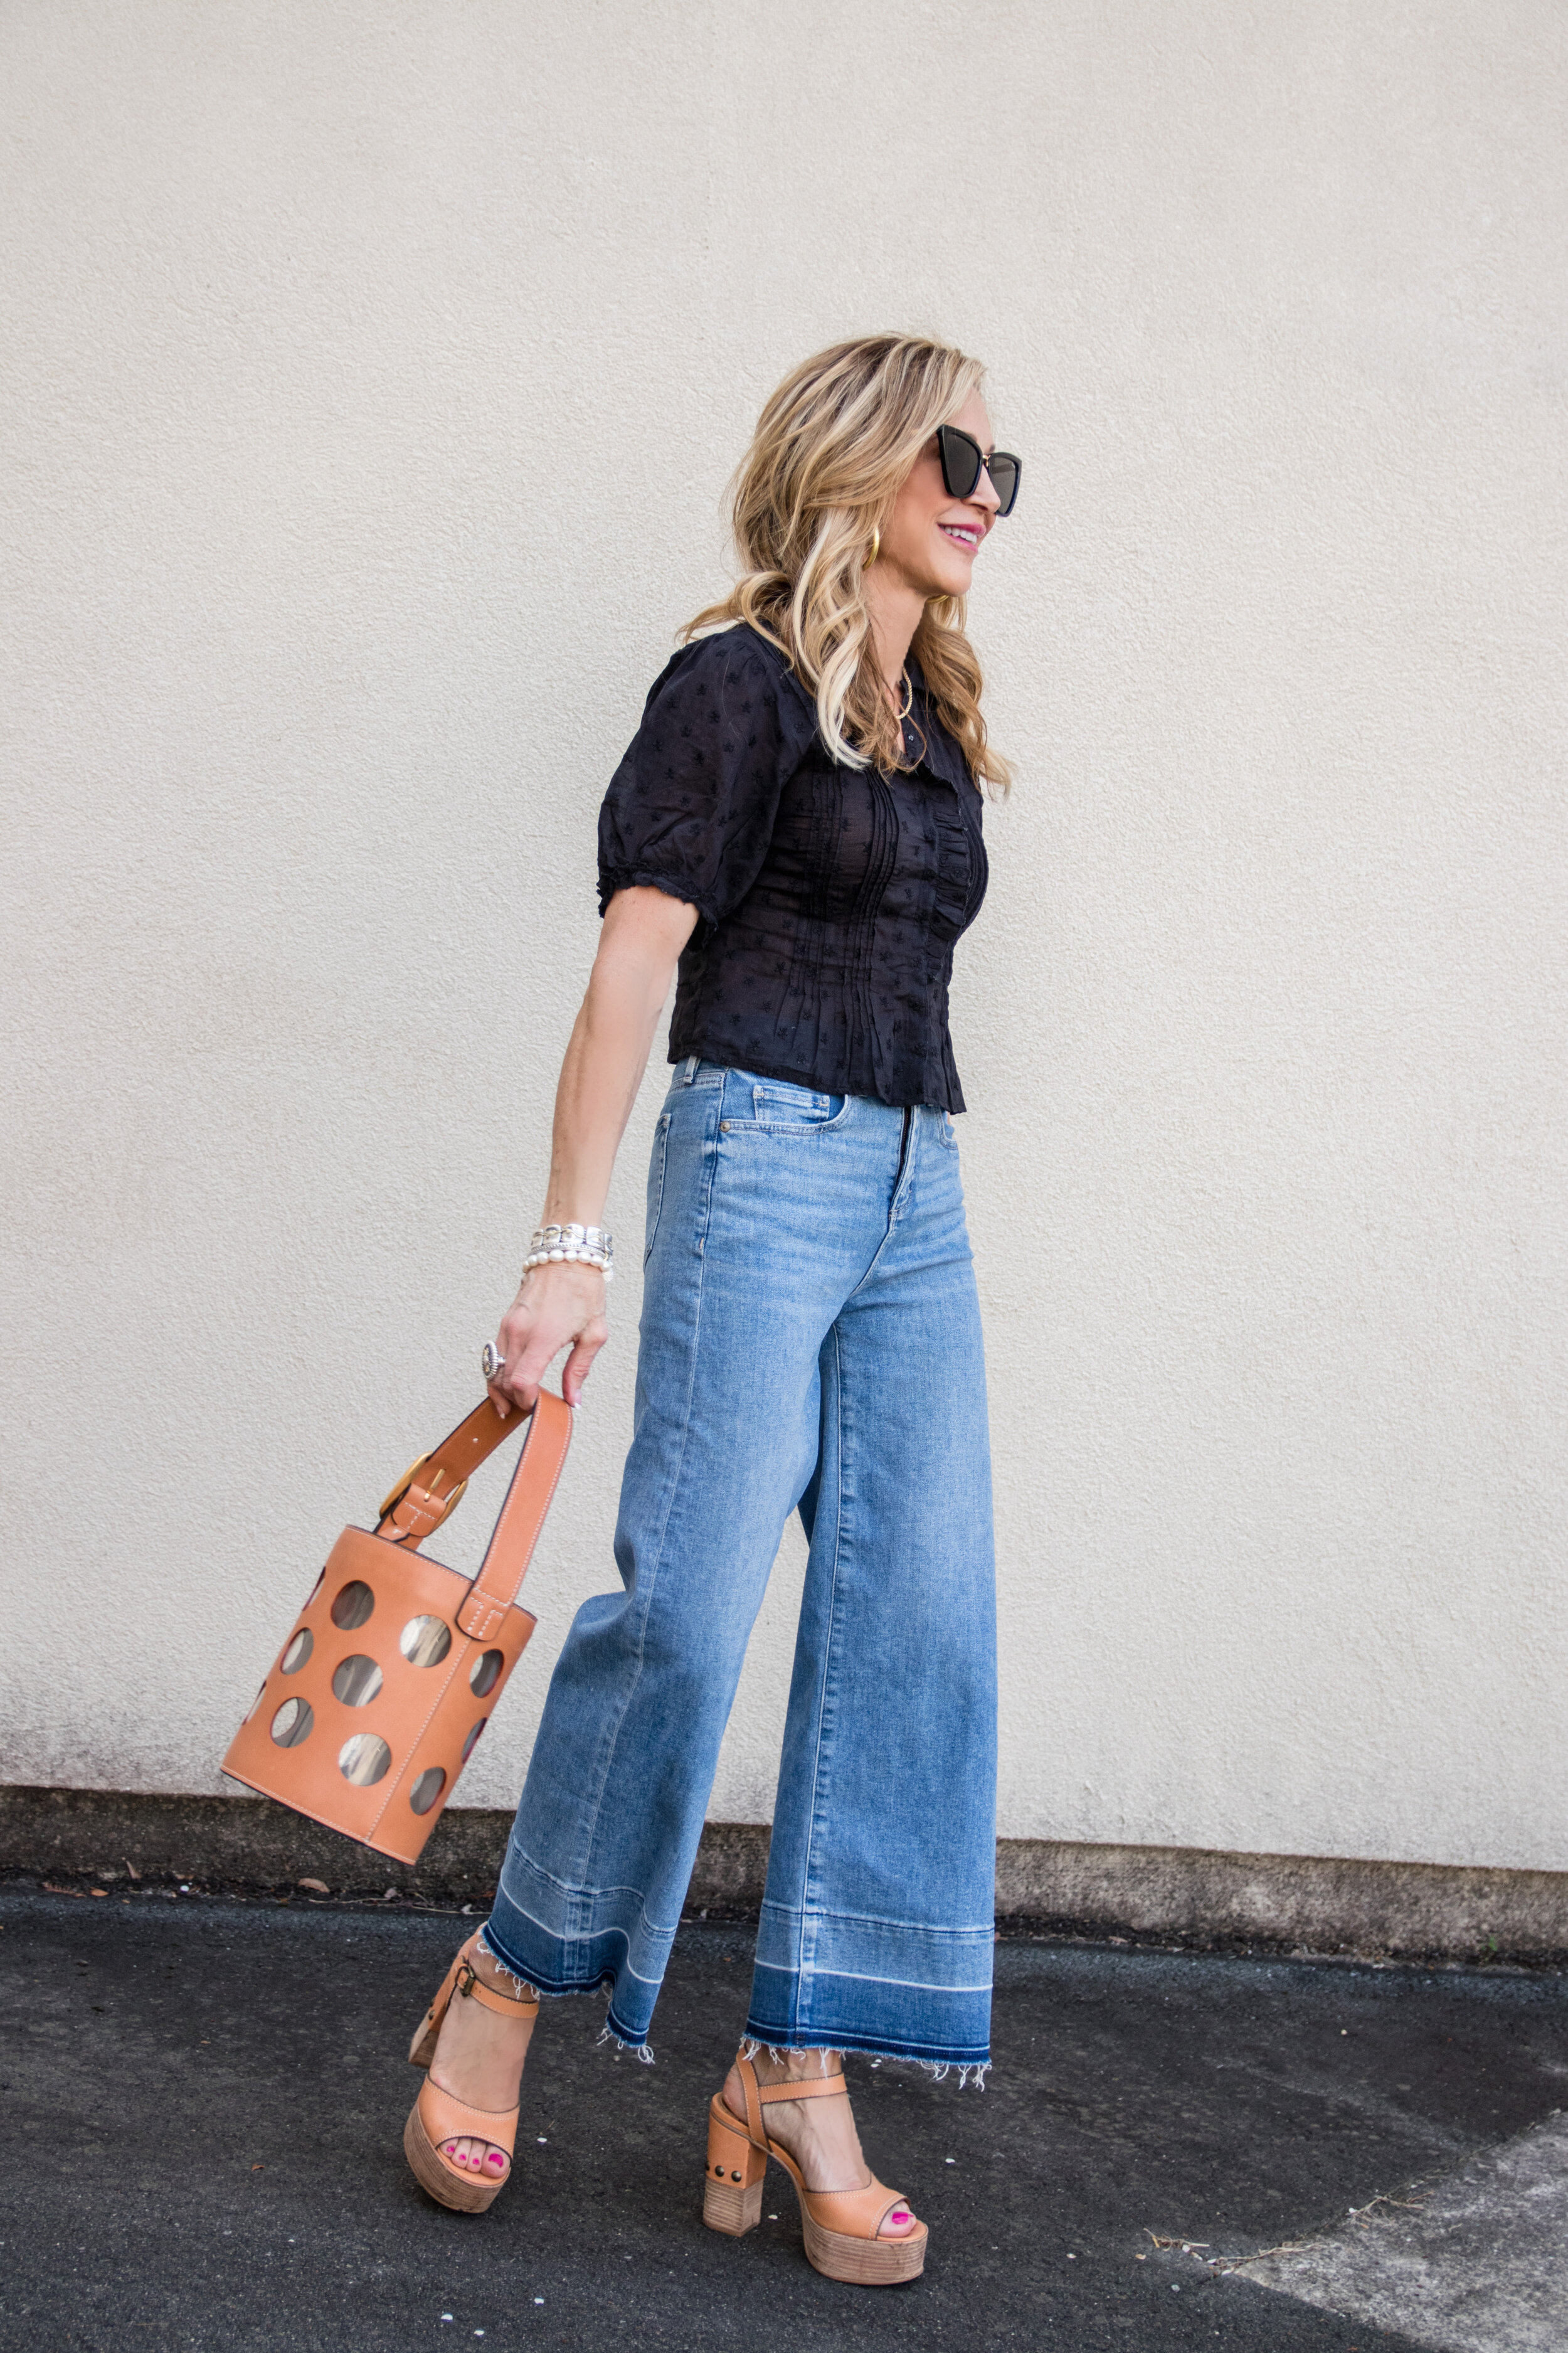 Wearing High Waisted Flare Denim With a Cropped Top — Crazy Blonde Life